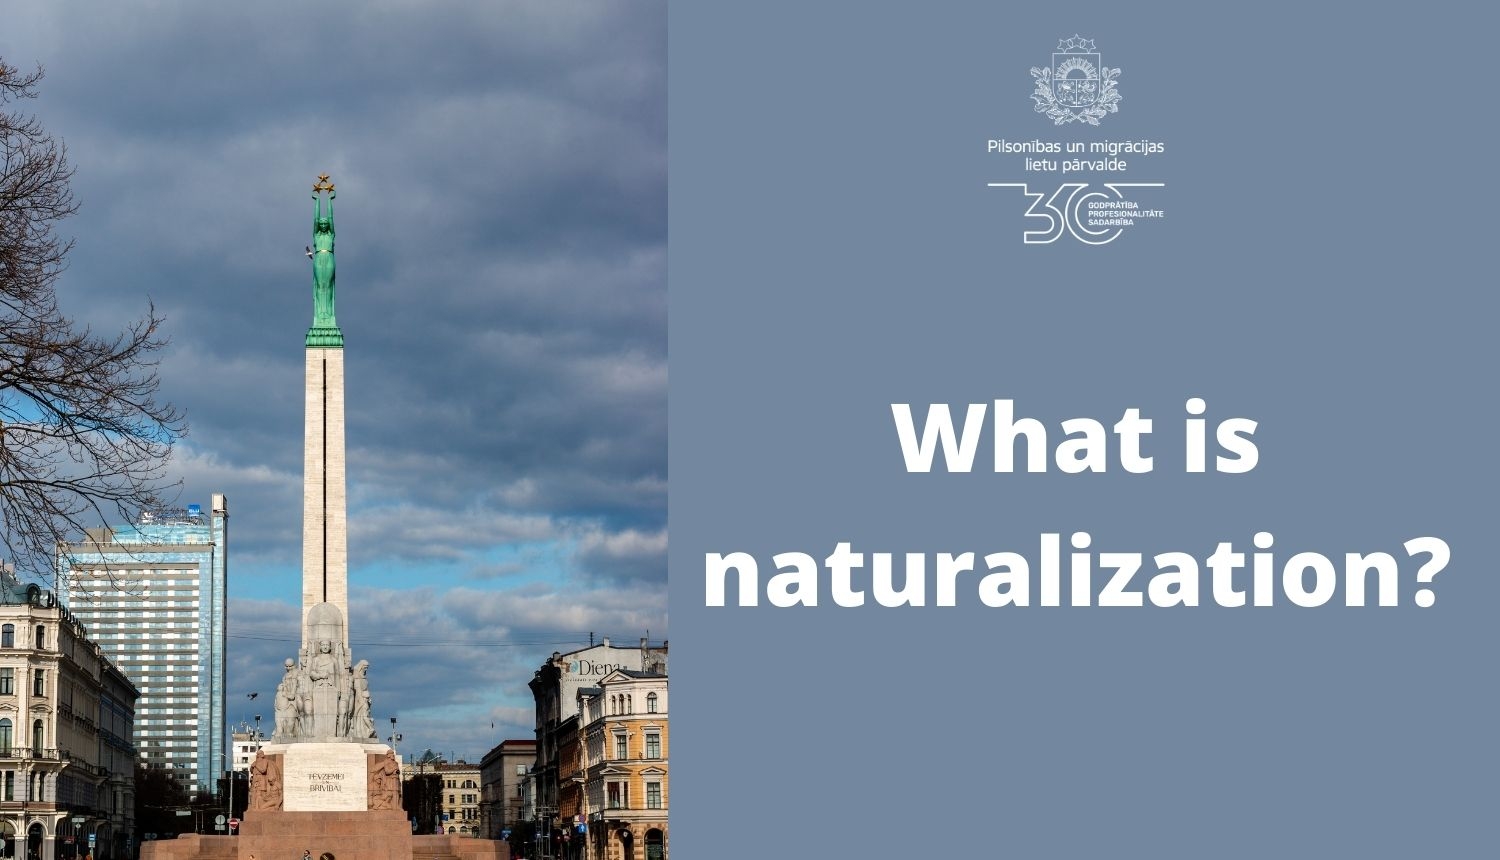 the freedom Monument and text: "What is naturalization?"